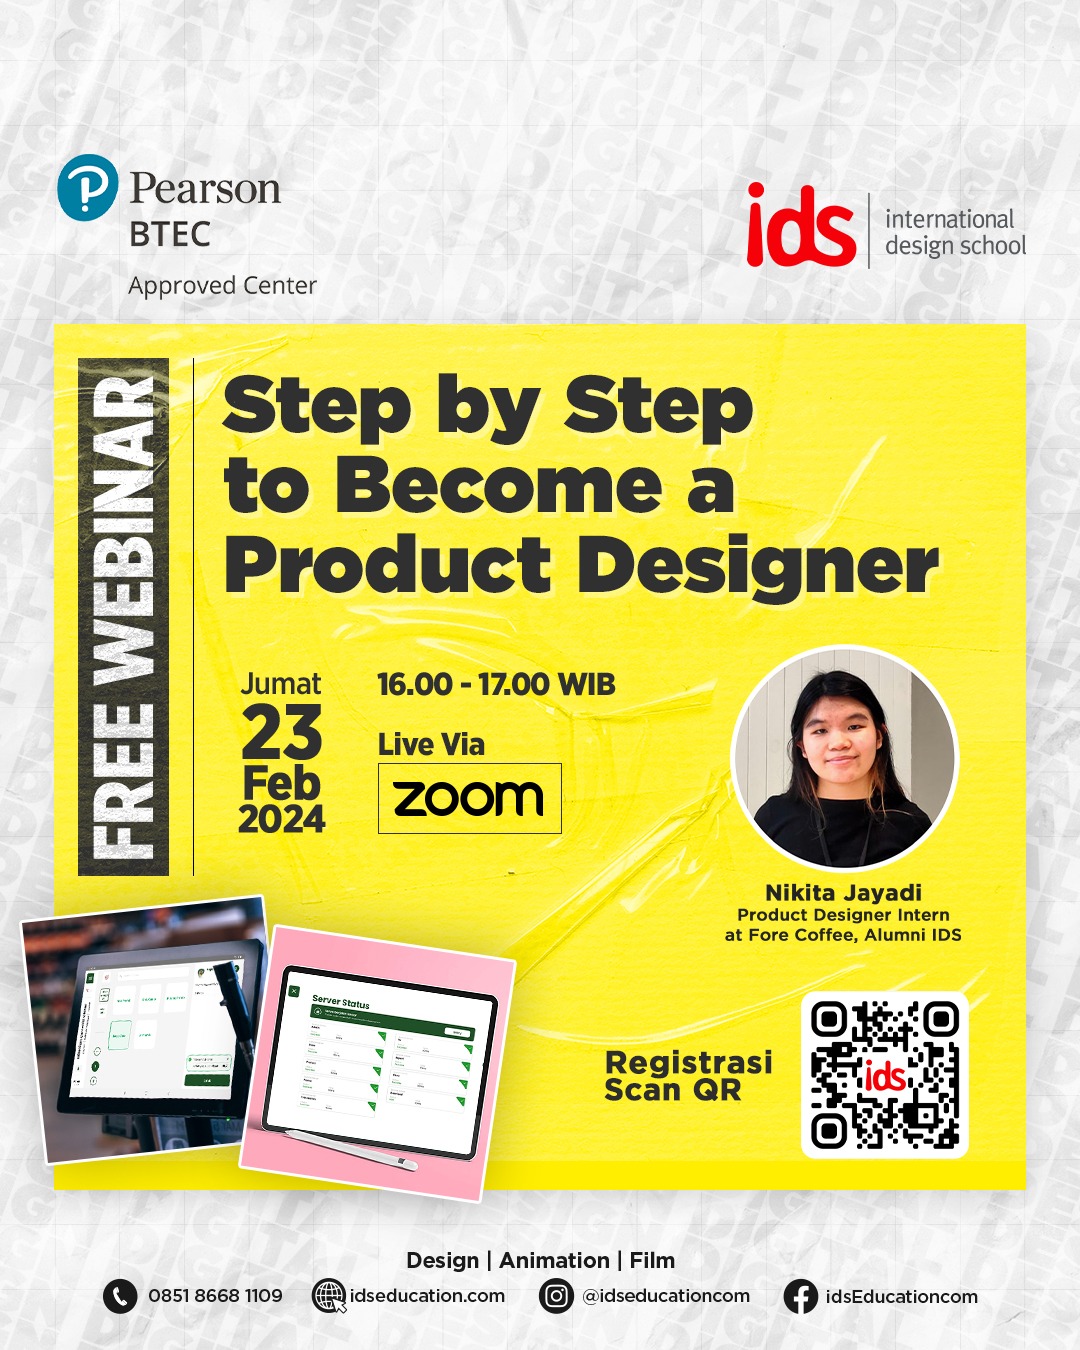 Step by Step to Become a Product Designer